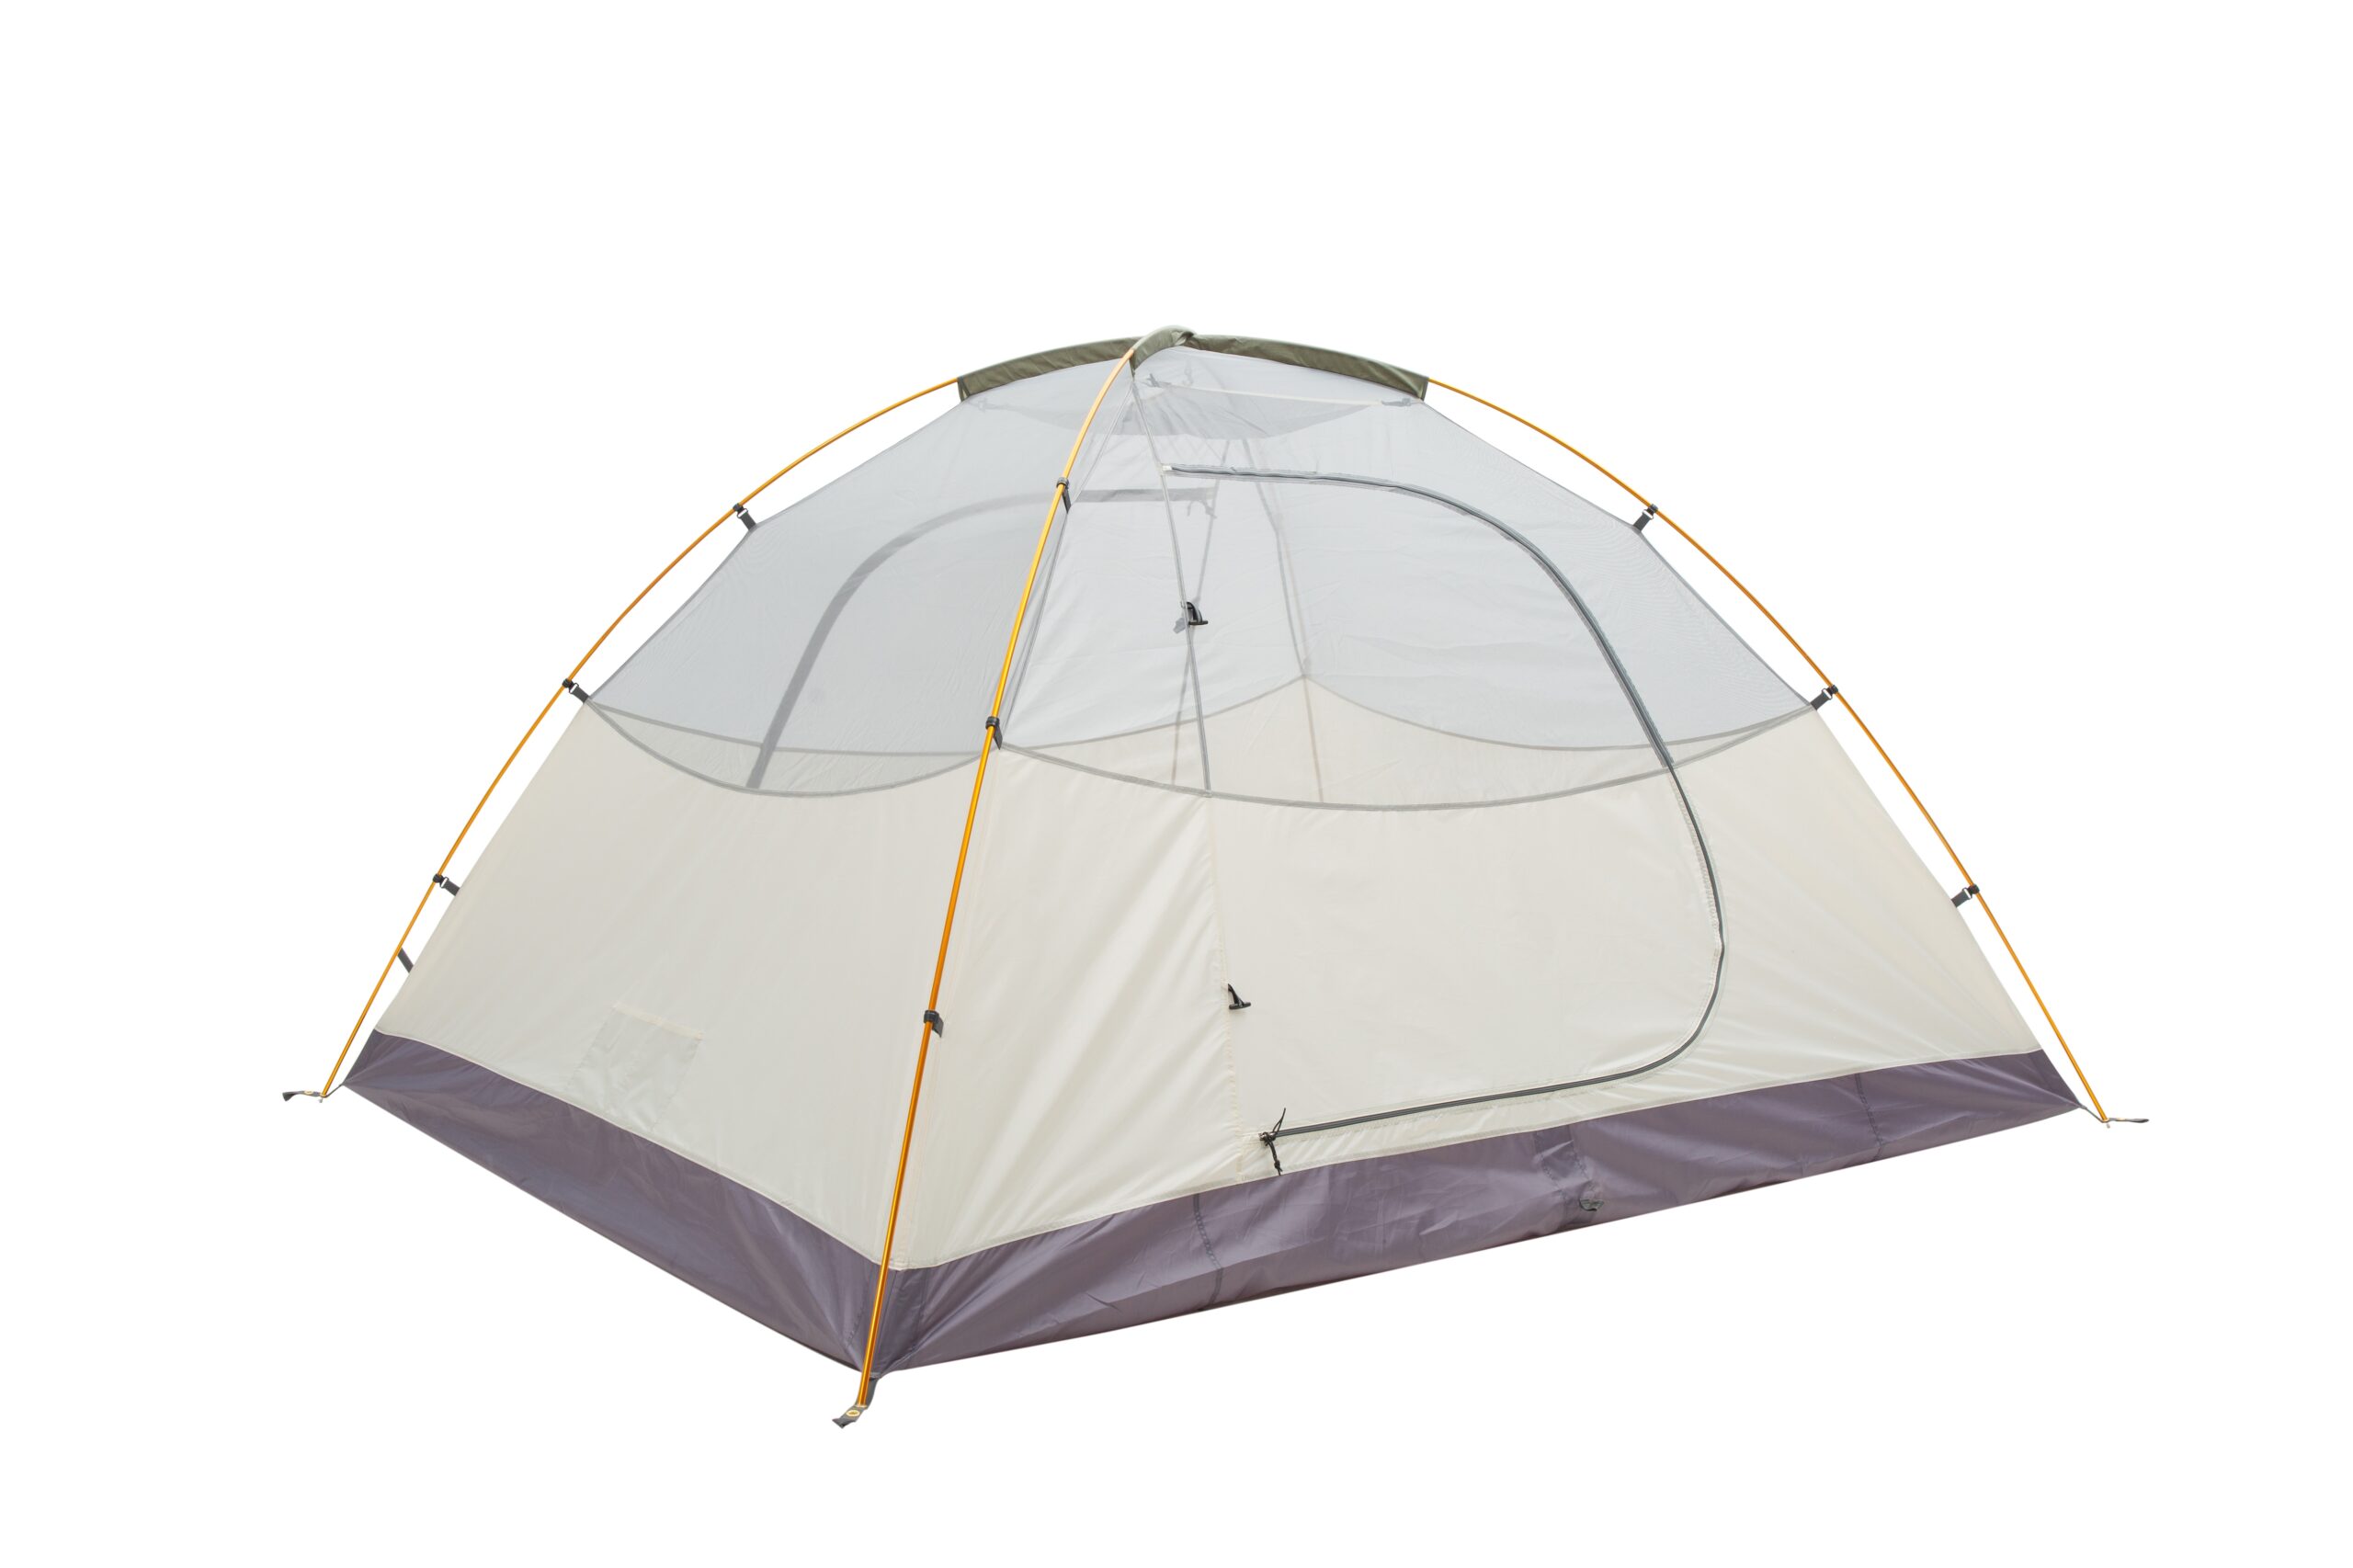 Blackdeer Expedition Camping Tent One Bedroom & One Living Room For 3-4 people 150D Oxford PU3000 mm Hiking Trekking Tent